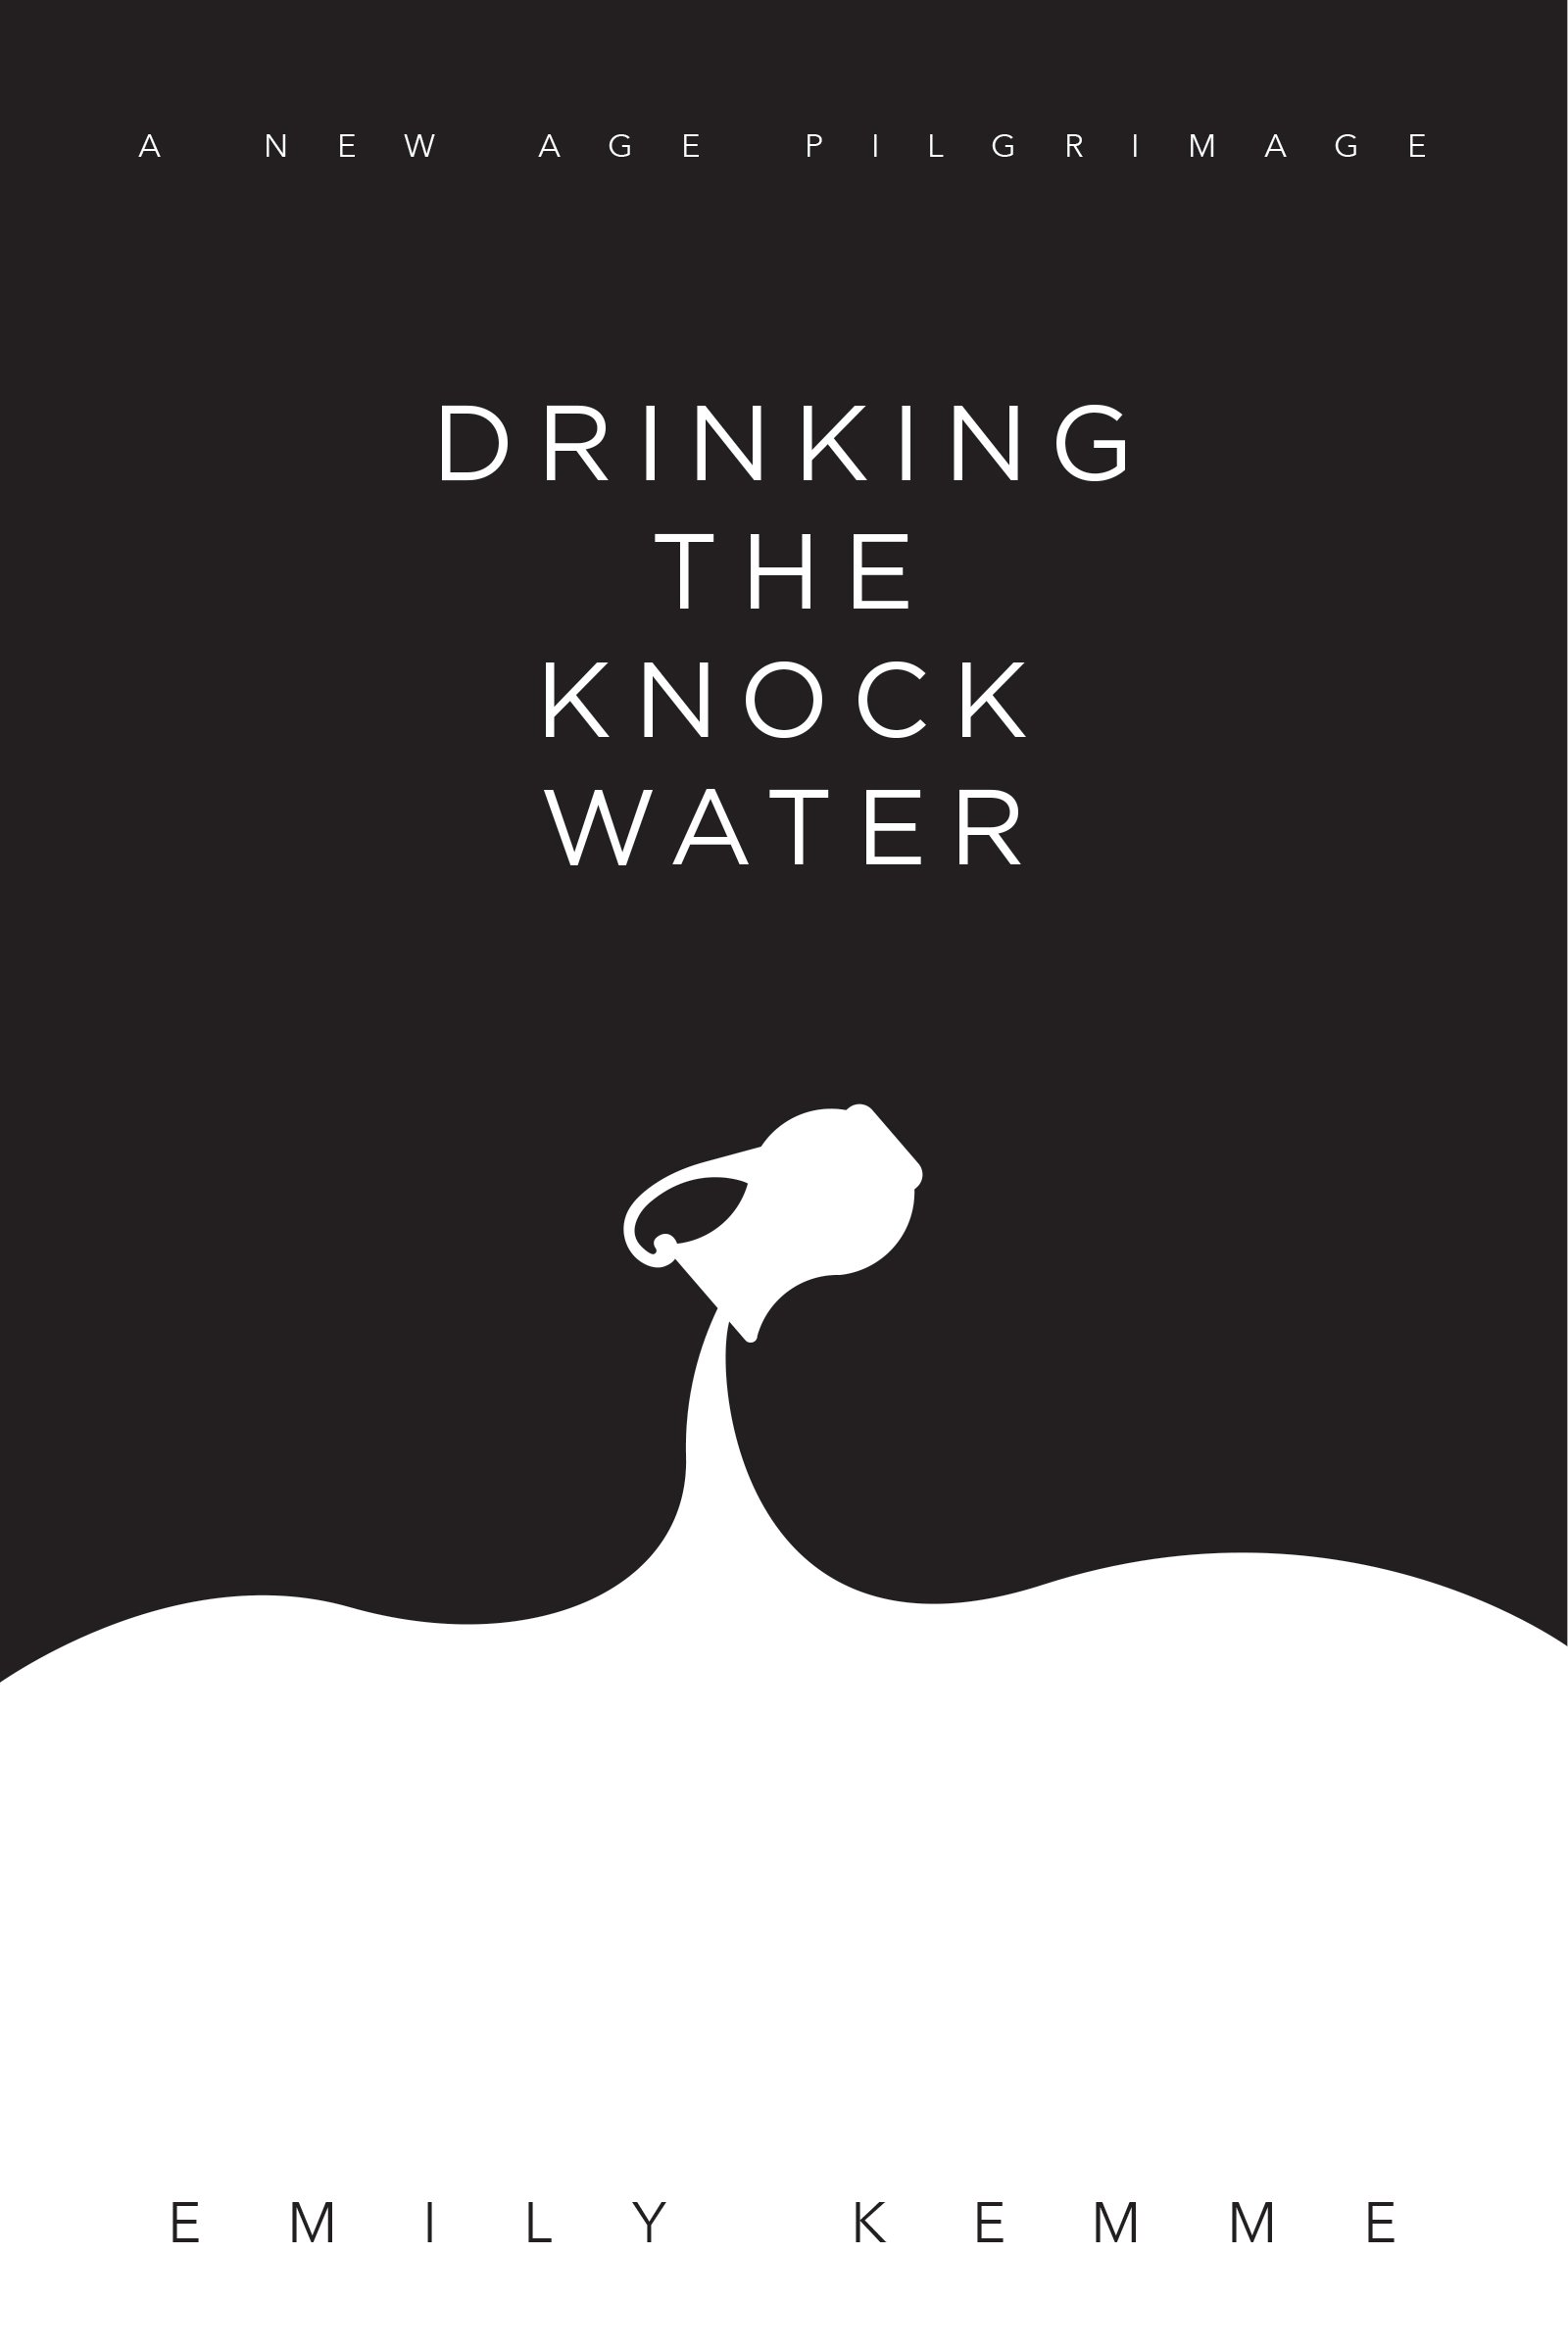 Drinking The Knock Water: A New Age Pilgrimage